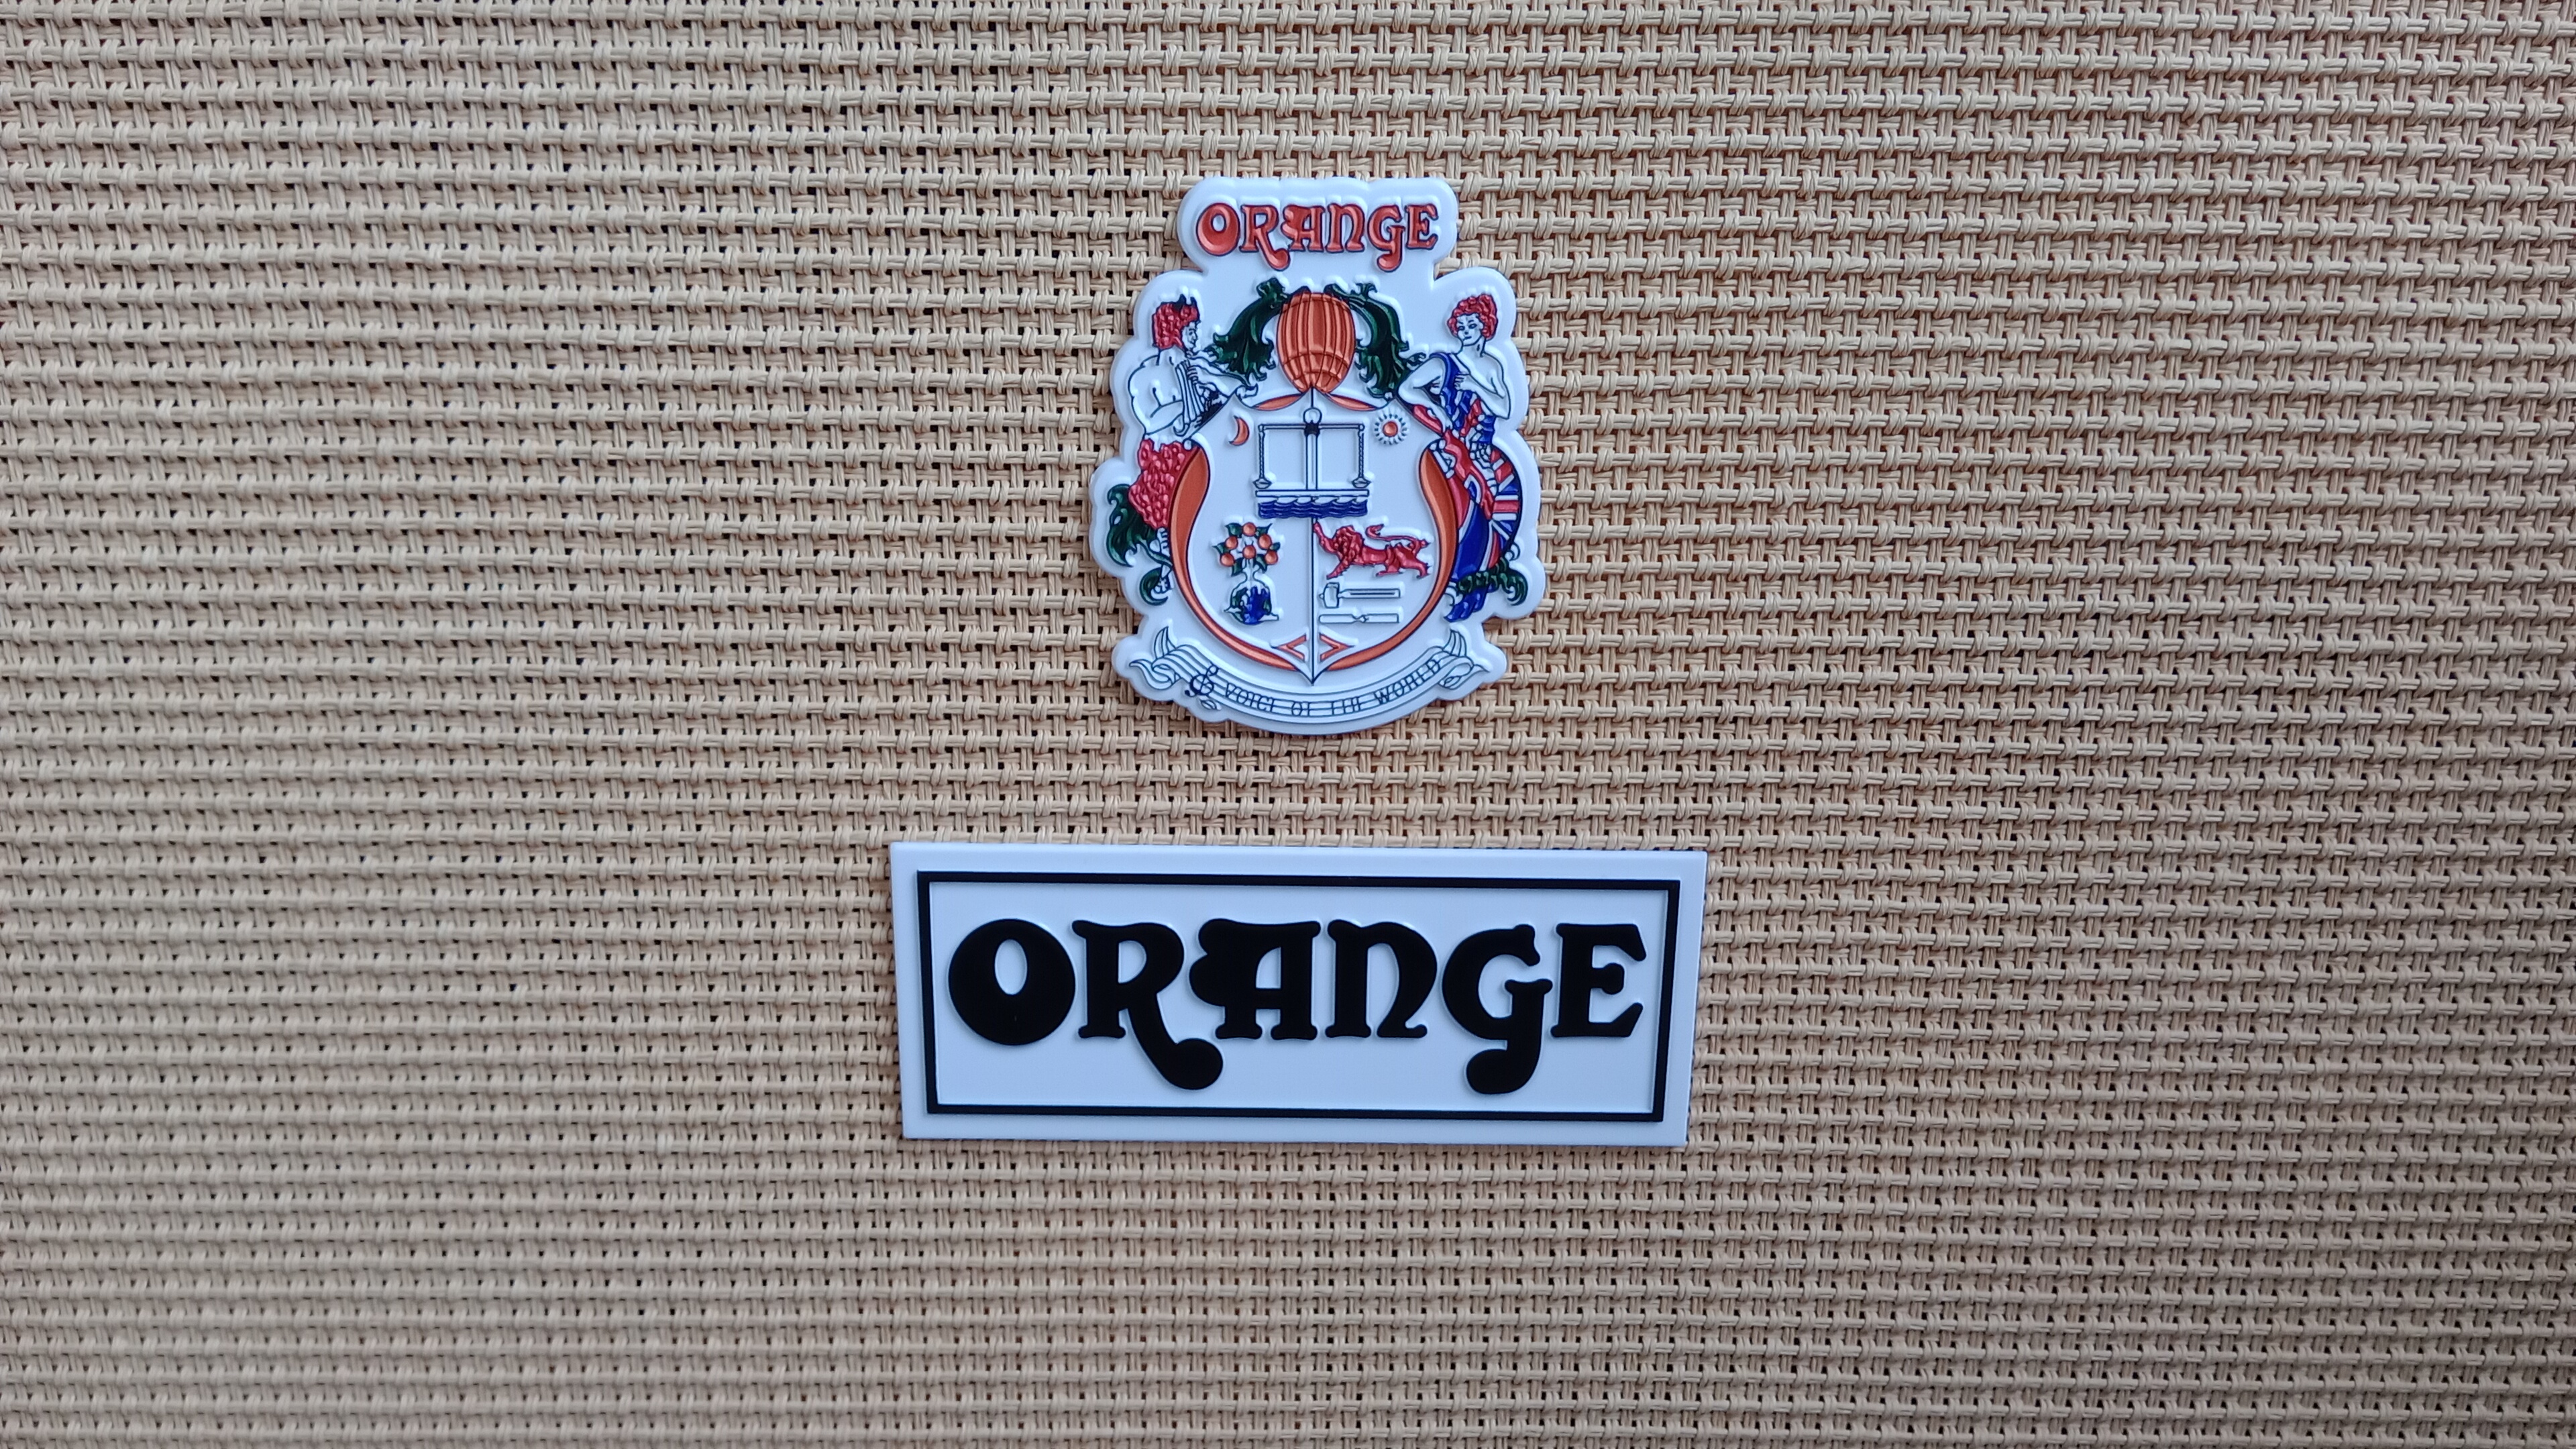 The badge on a guitar amp that says 